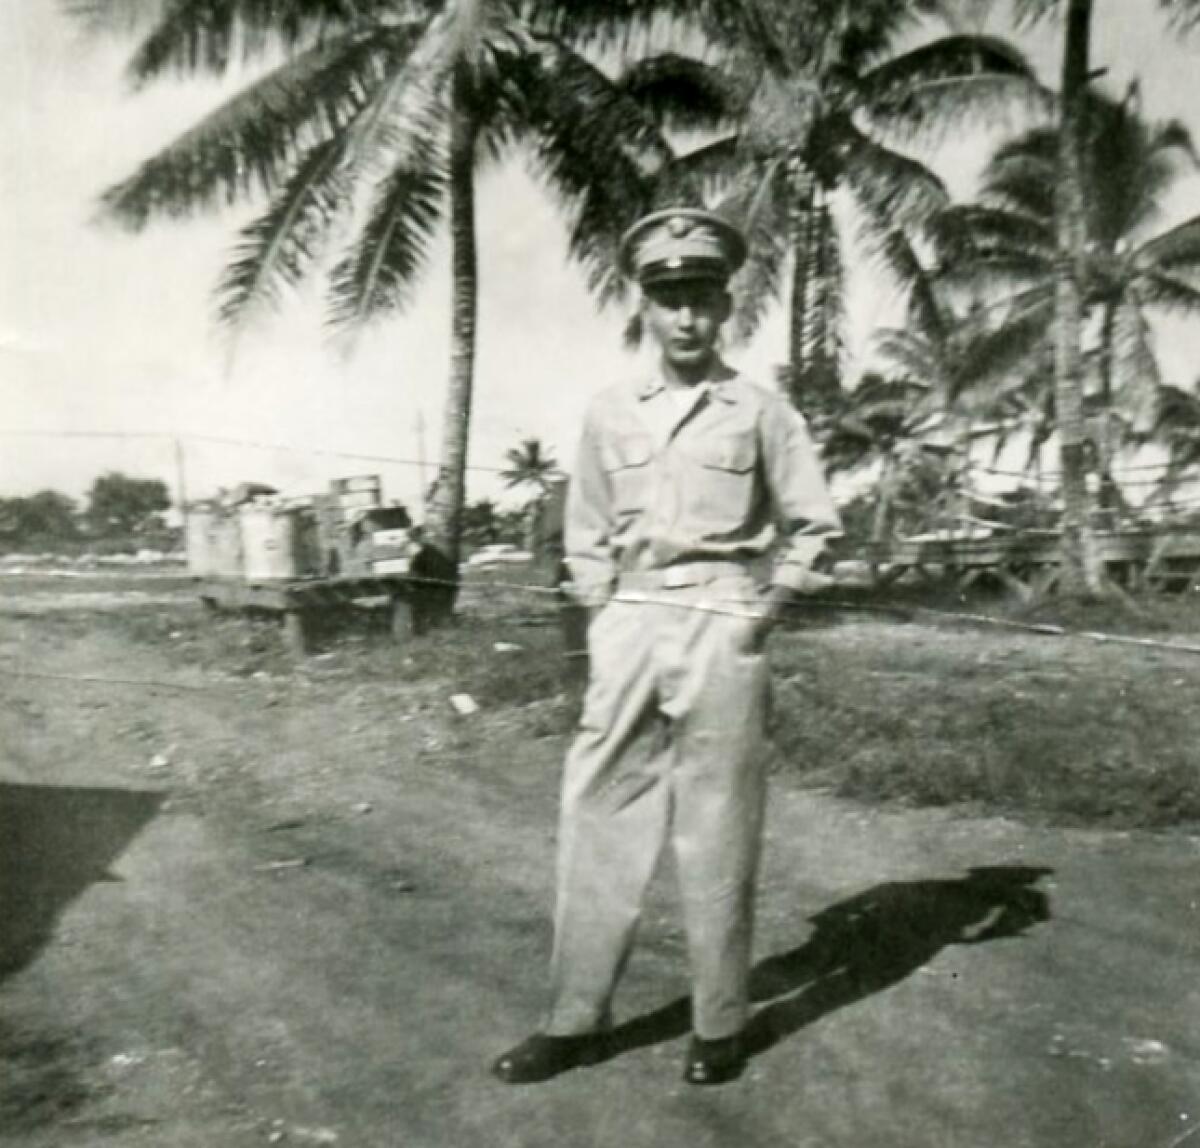 A black-and-white image of a young man in a military uniform standing in front of palm trees.